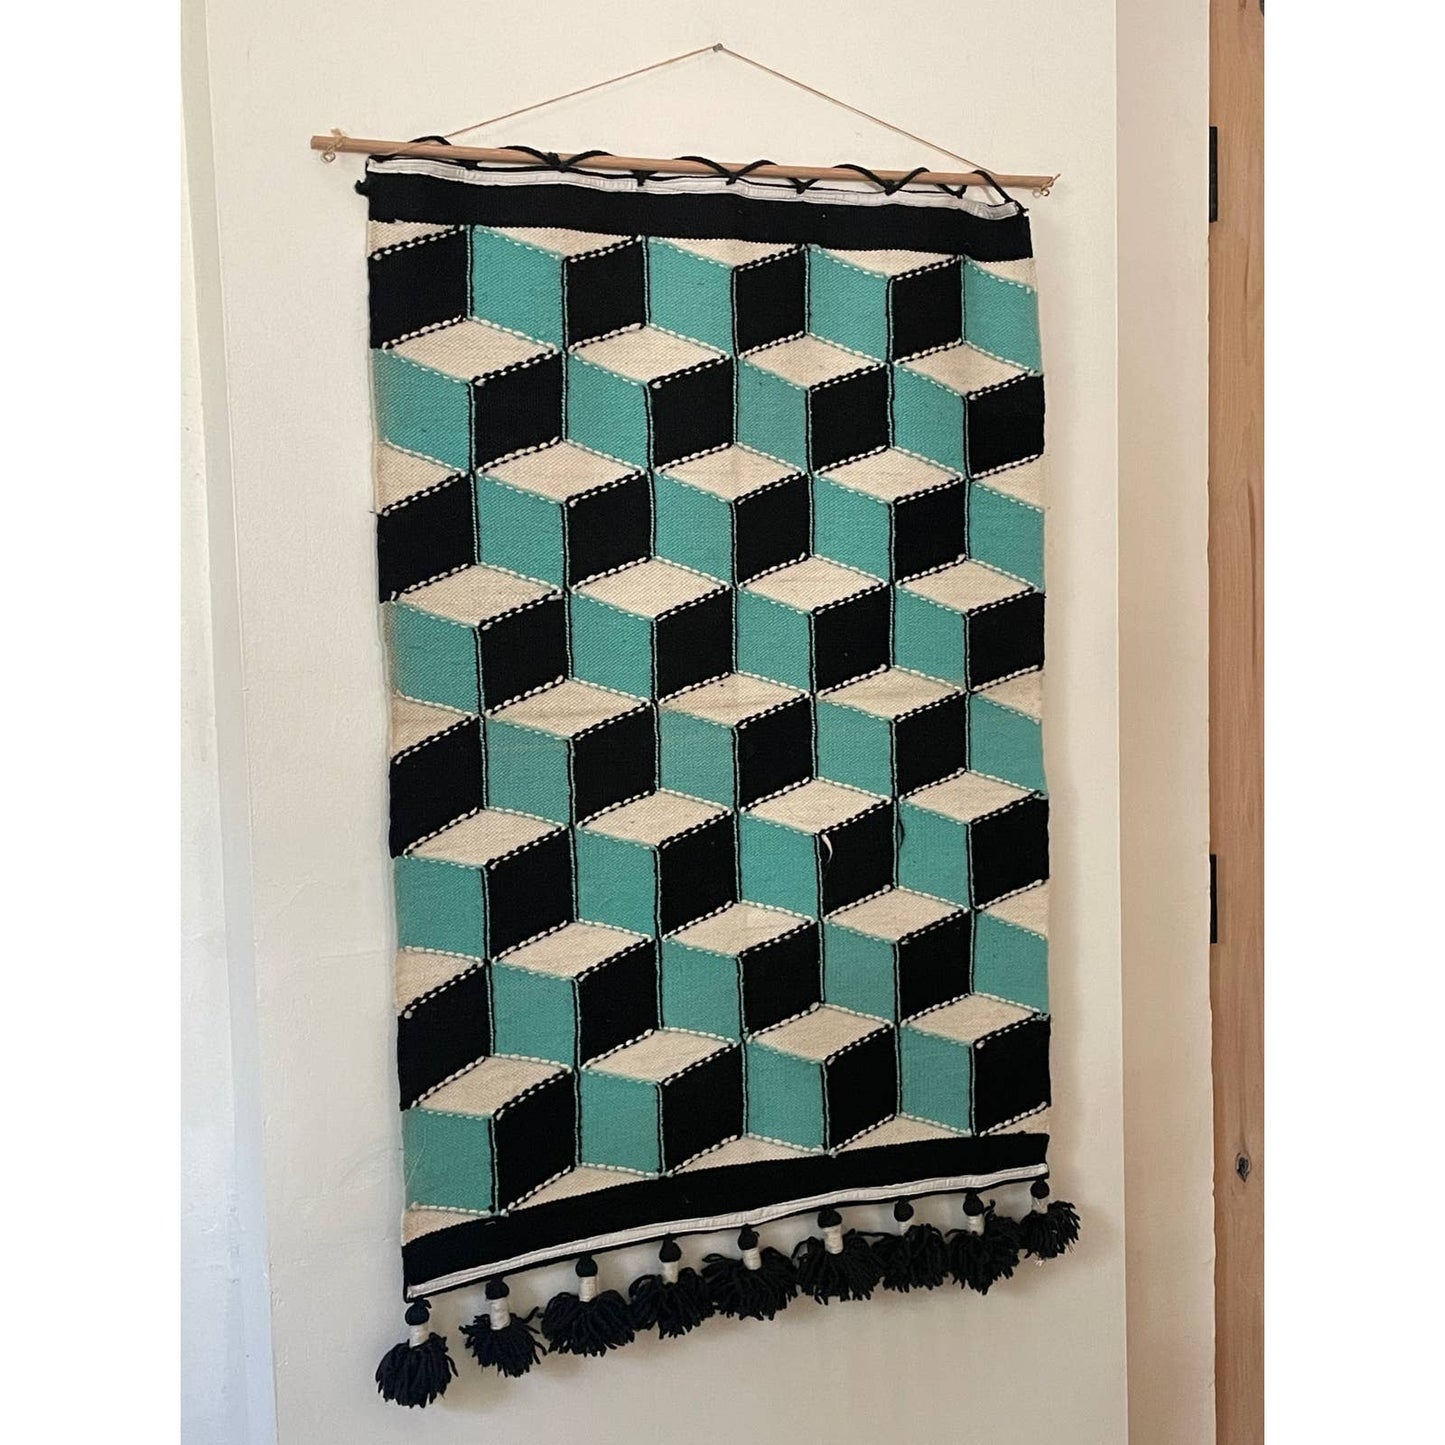 Hand-stitched Geometric Cube Optical Illusion Tapestry